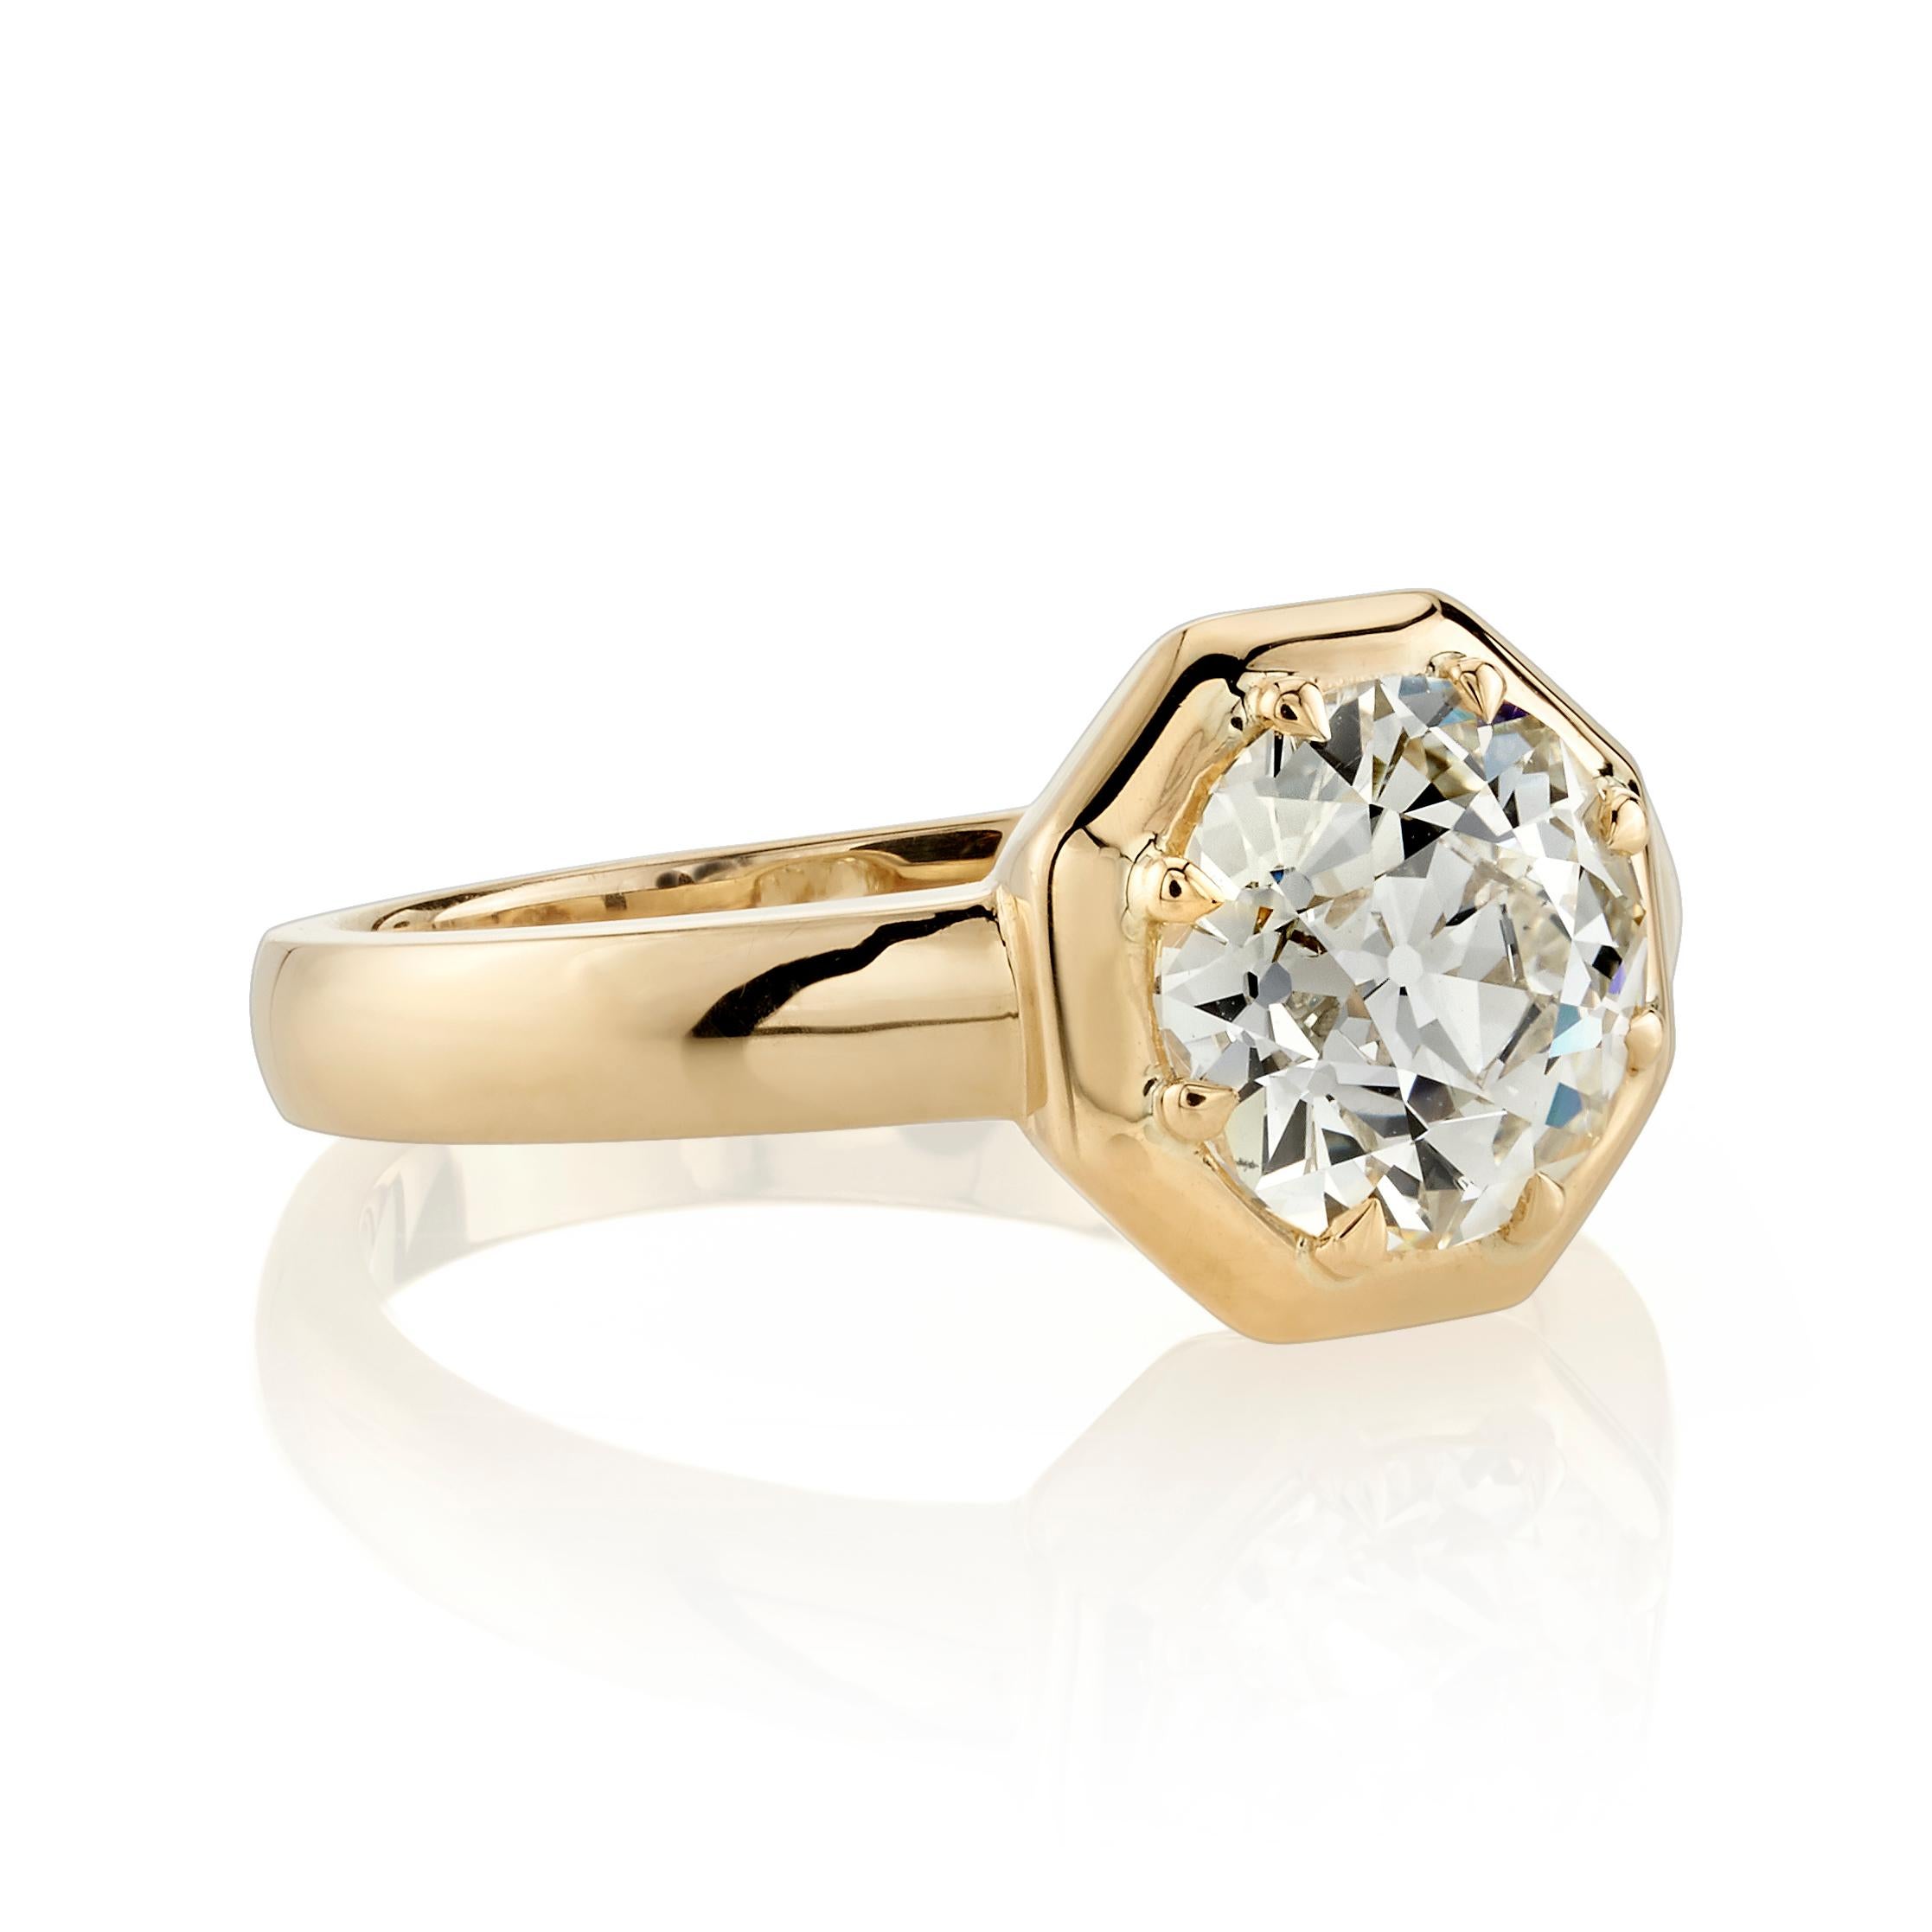 1.99ct O-P/VS1 GIA certified old European cut diamond prong set in a handcrafted 18K yellow gold mounting.